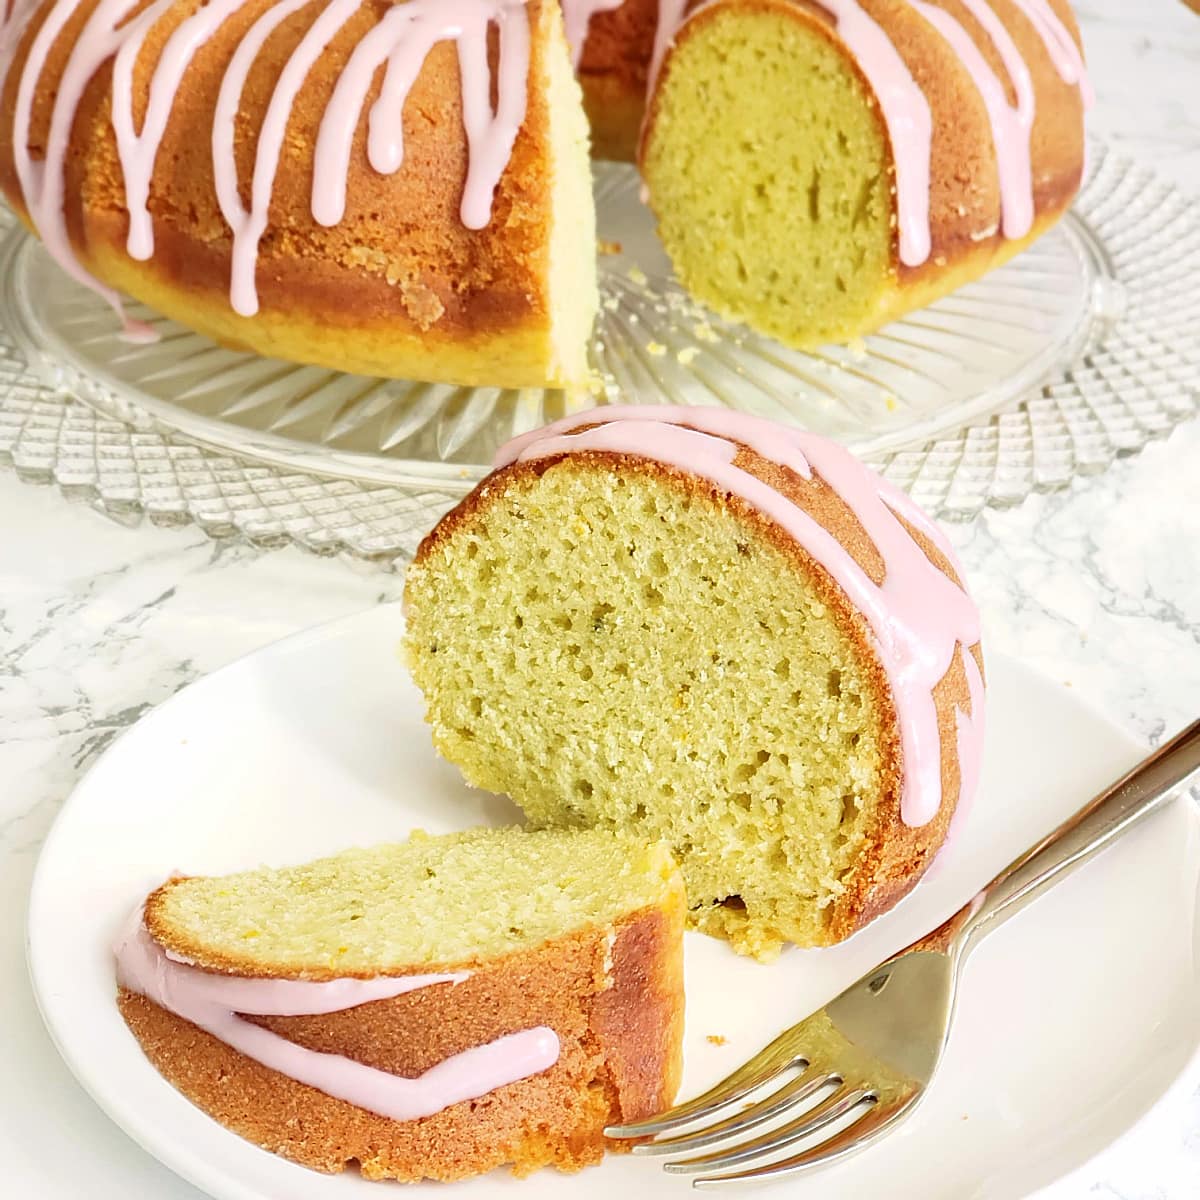 2 slices of Italian Blood Orange Olive Oil Bundt Cake on a white plate with fork, with the cake behind on a glass cake plate